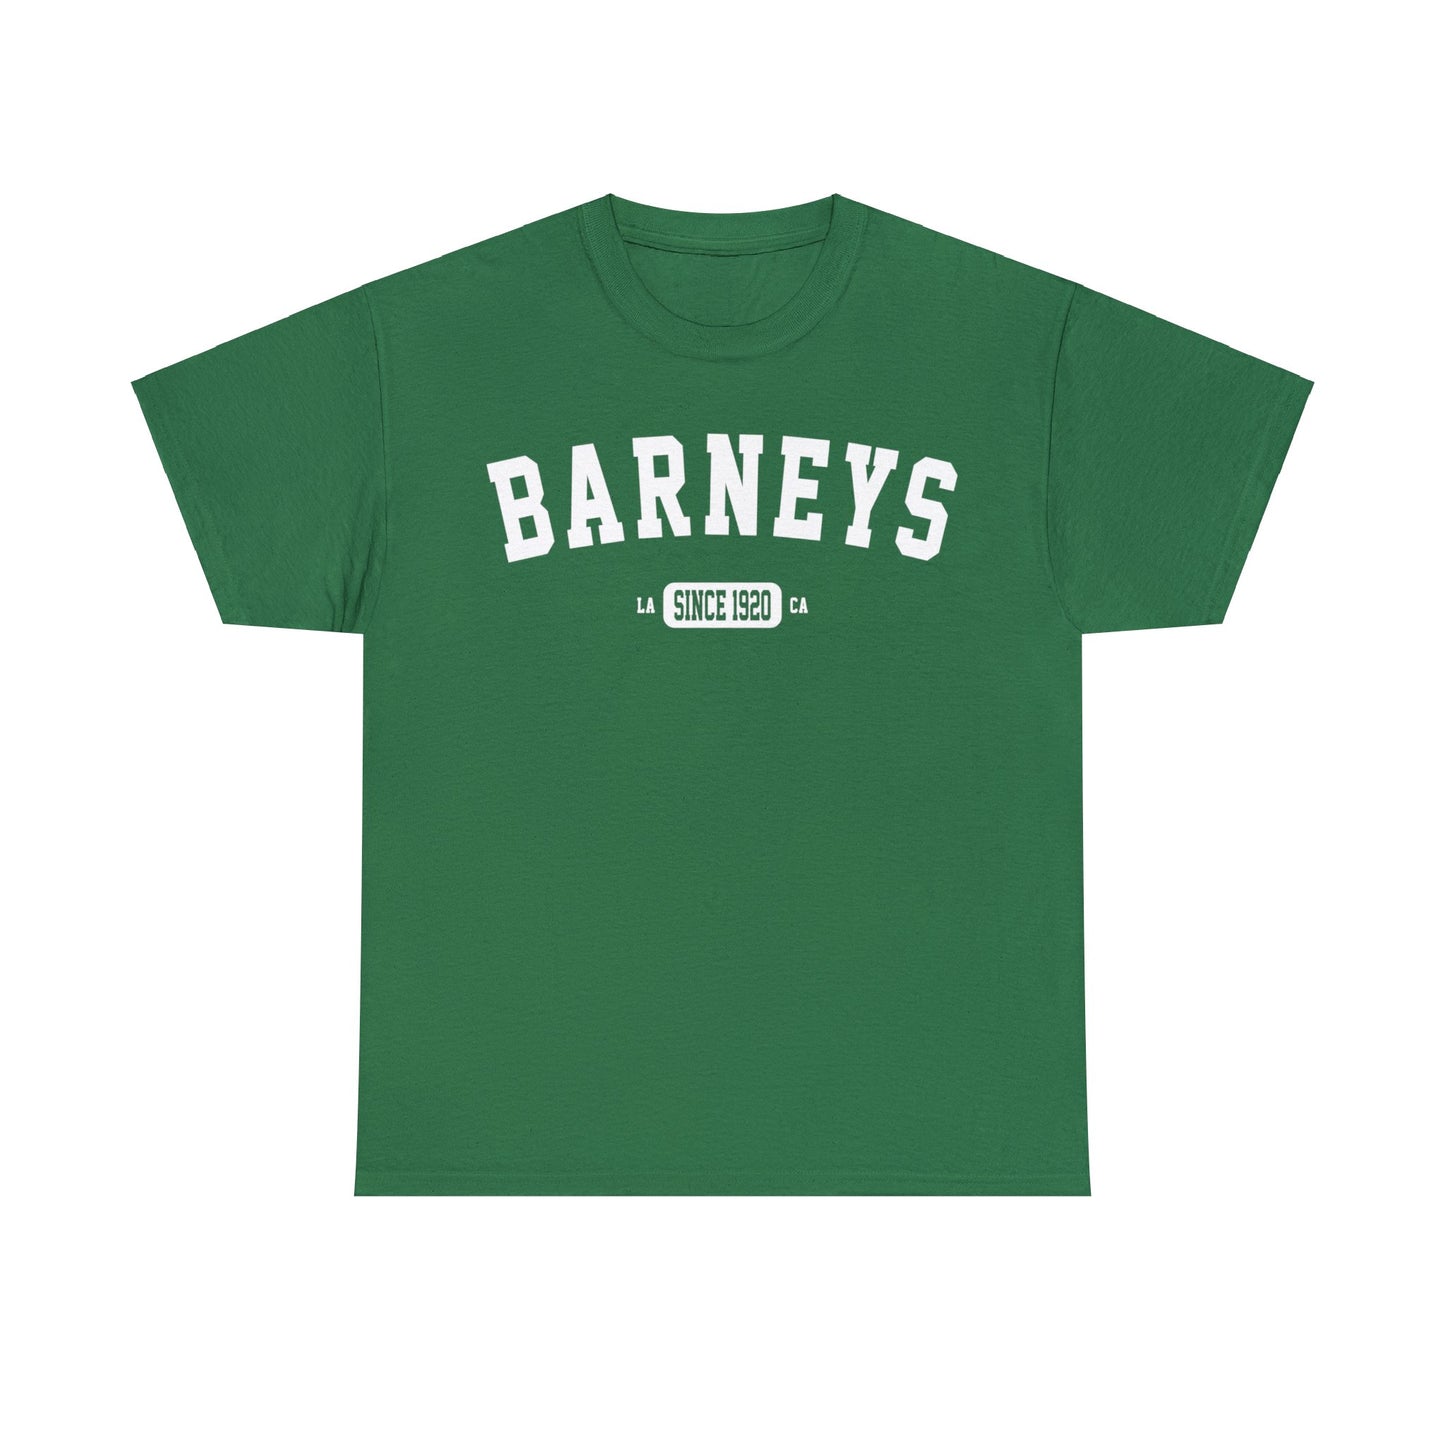 Vintage Collegiate | BARNEY'S BEANERY - Women's Graphic Tee | Turf Green Gildan 5000 T-Shirt, White Graphic, Front View Flat Lay